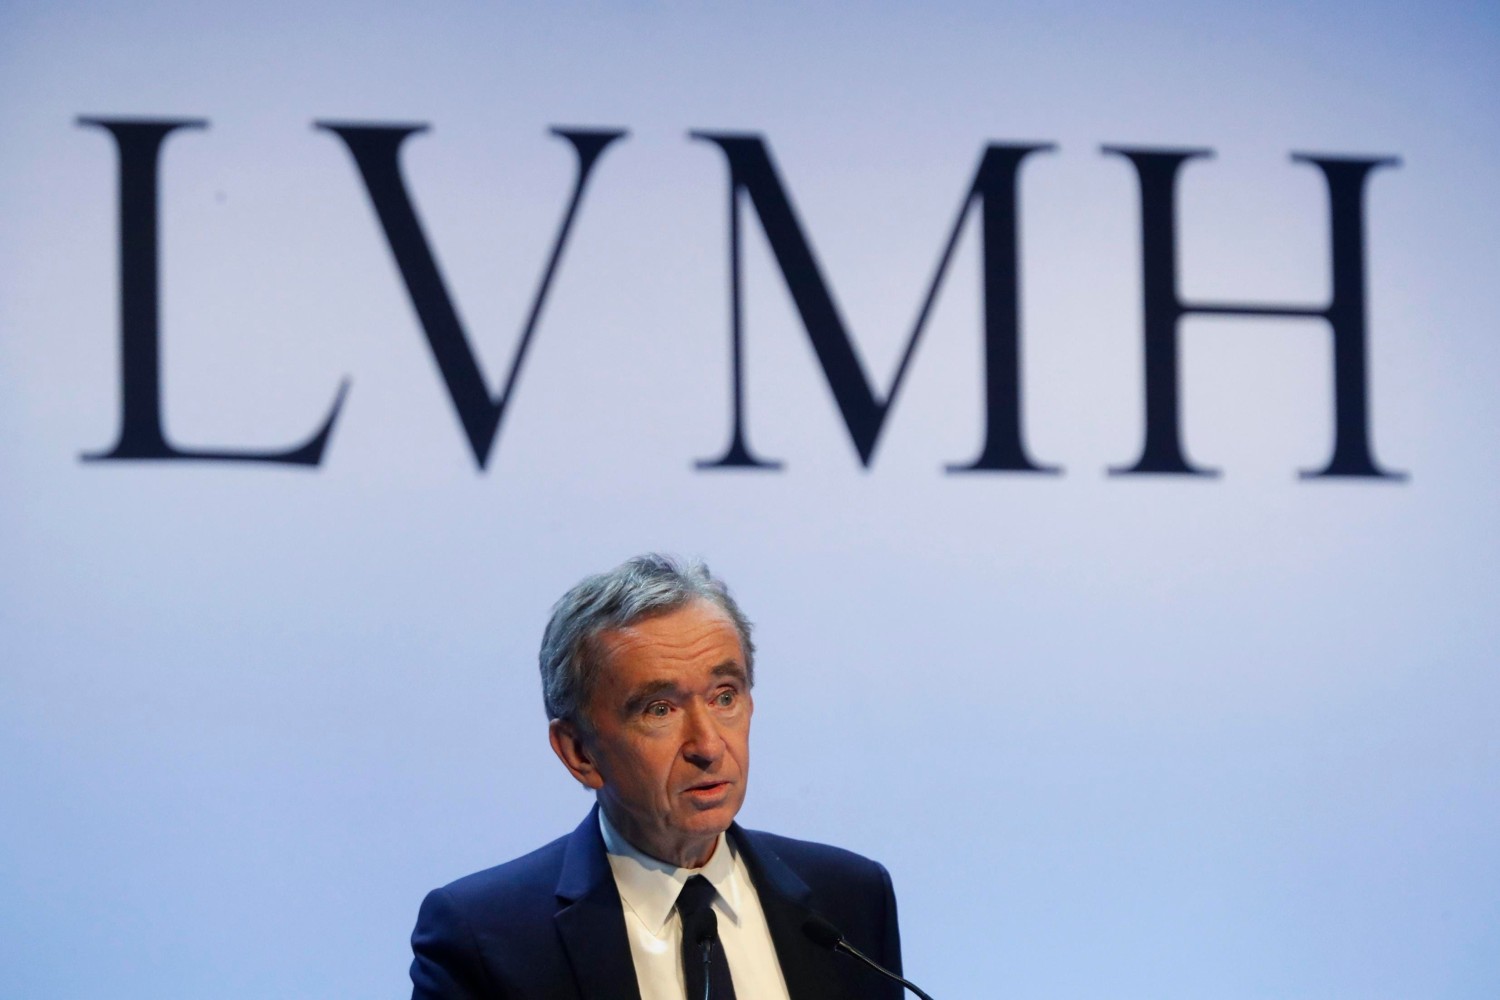 FILE - In this Jan. 28, 2020 file photo, CEO of LVMH Bernard Arnault presents the group's 2019 results during a press conference, in Paris. (AP Photo/Thibault Camus, File)COPYRIGHT 2020 THE ASSOCIATED PRESS. ALL RIGHTS RESERVED